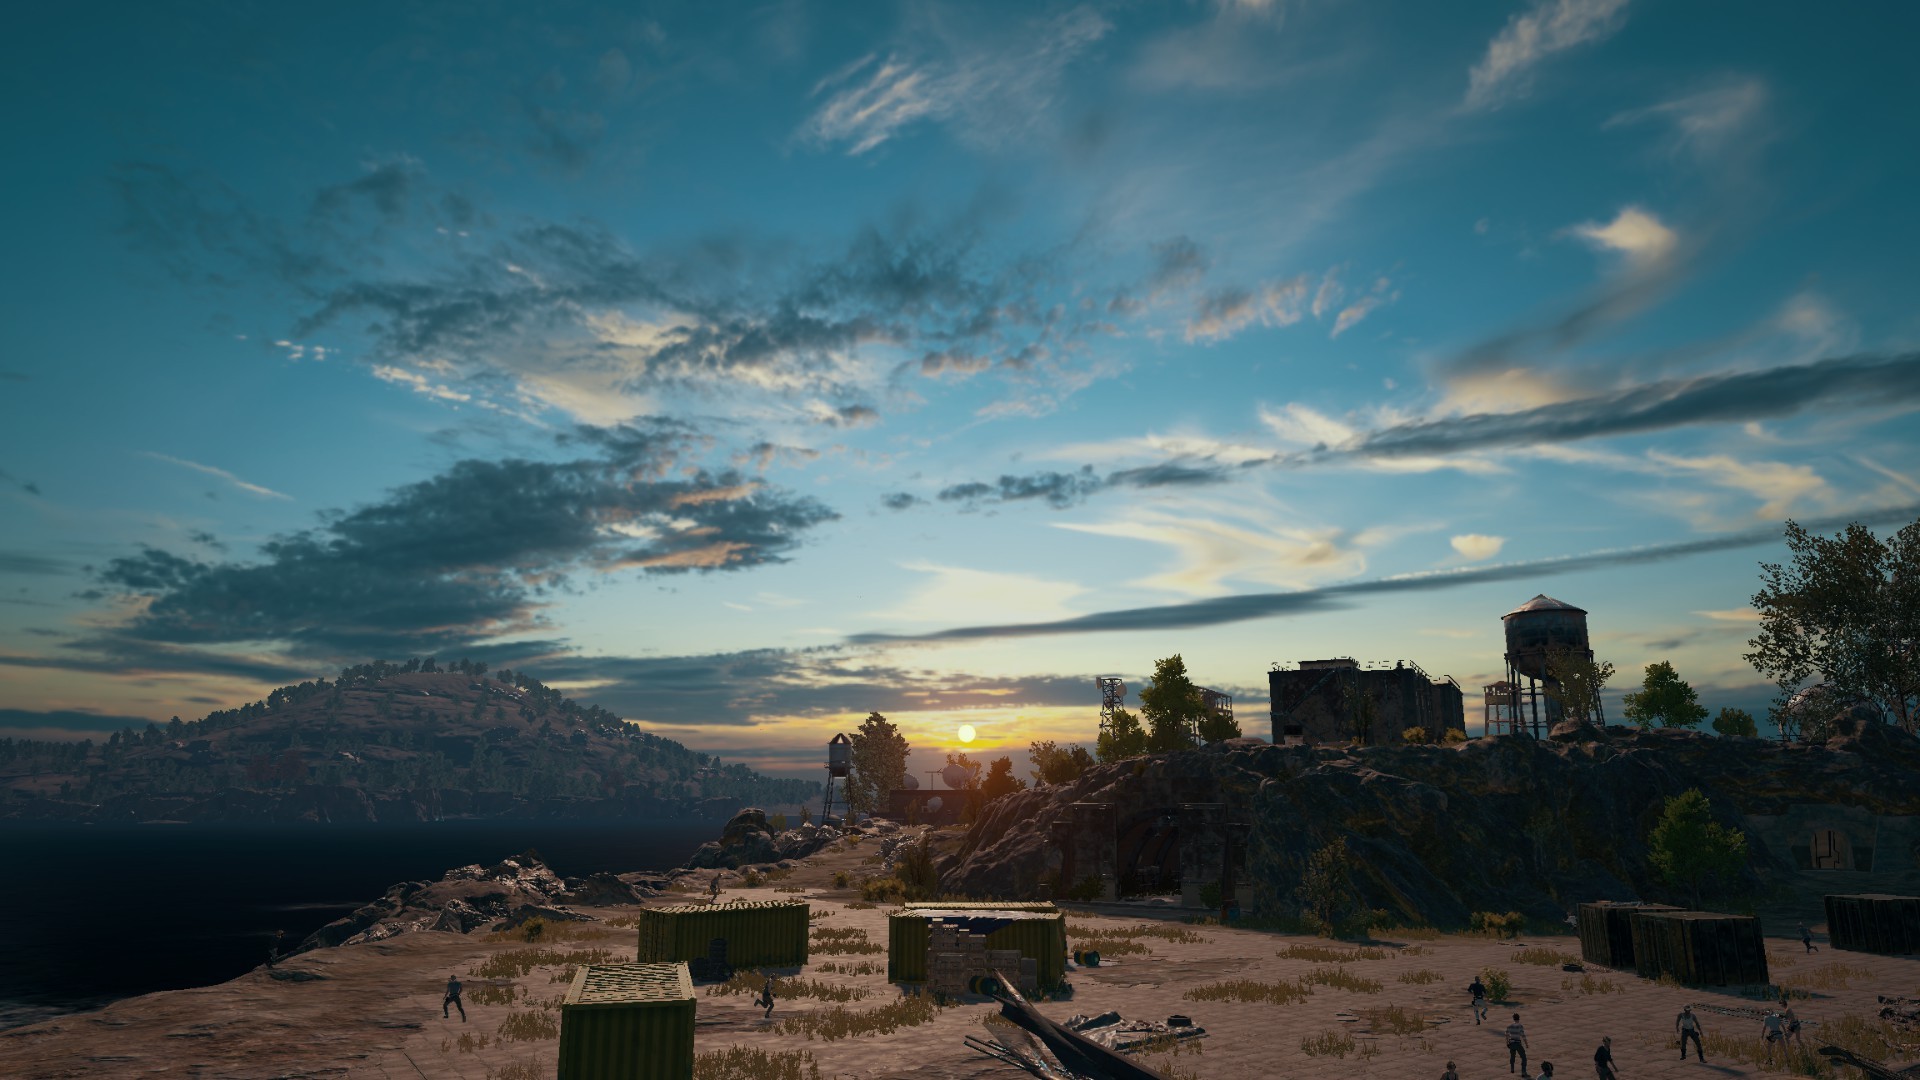 PUBG PC Desktop Wallpaper with image resolution 1920x1080 pixel. You can use this wallpaper as background for your desktop Computer Screensavers, Android or iPhone smartphones